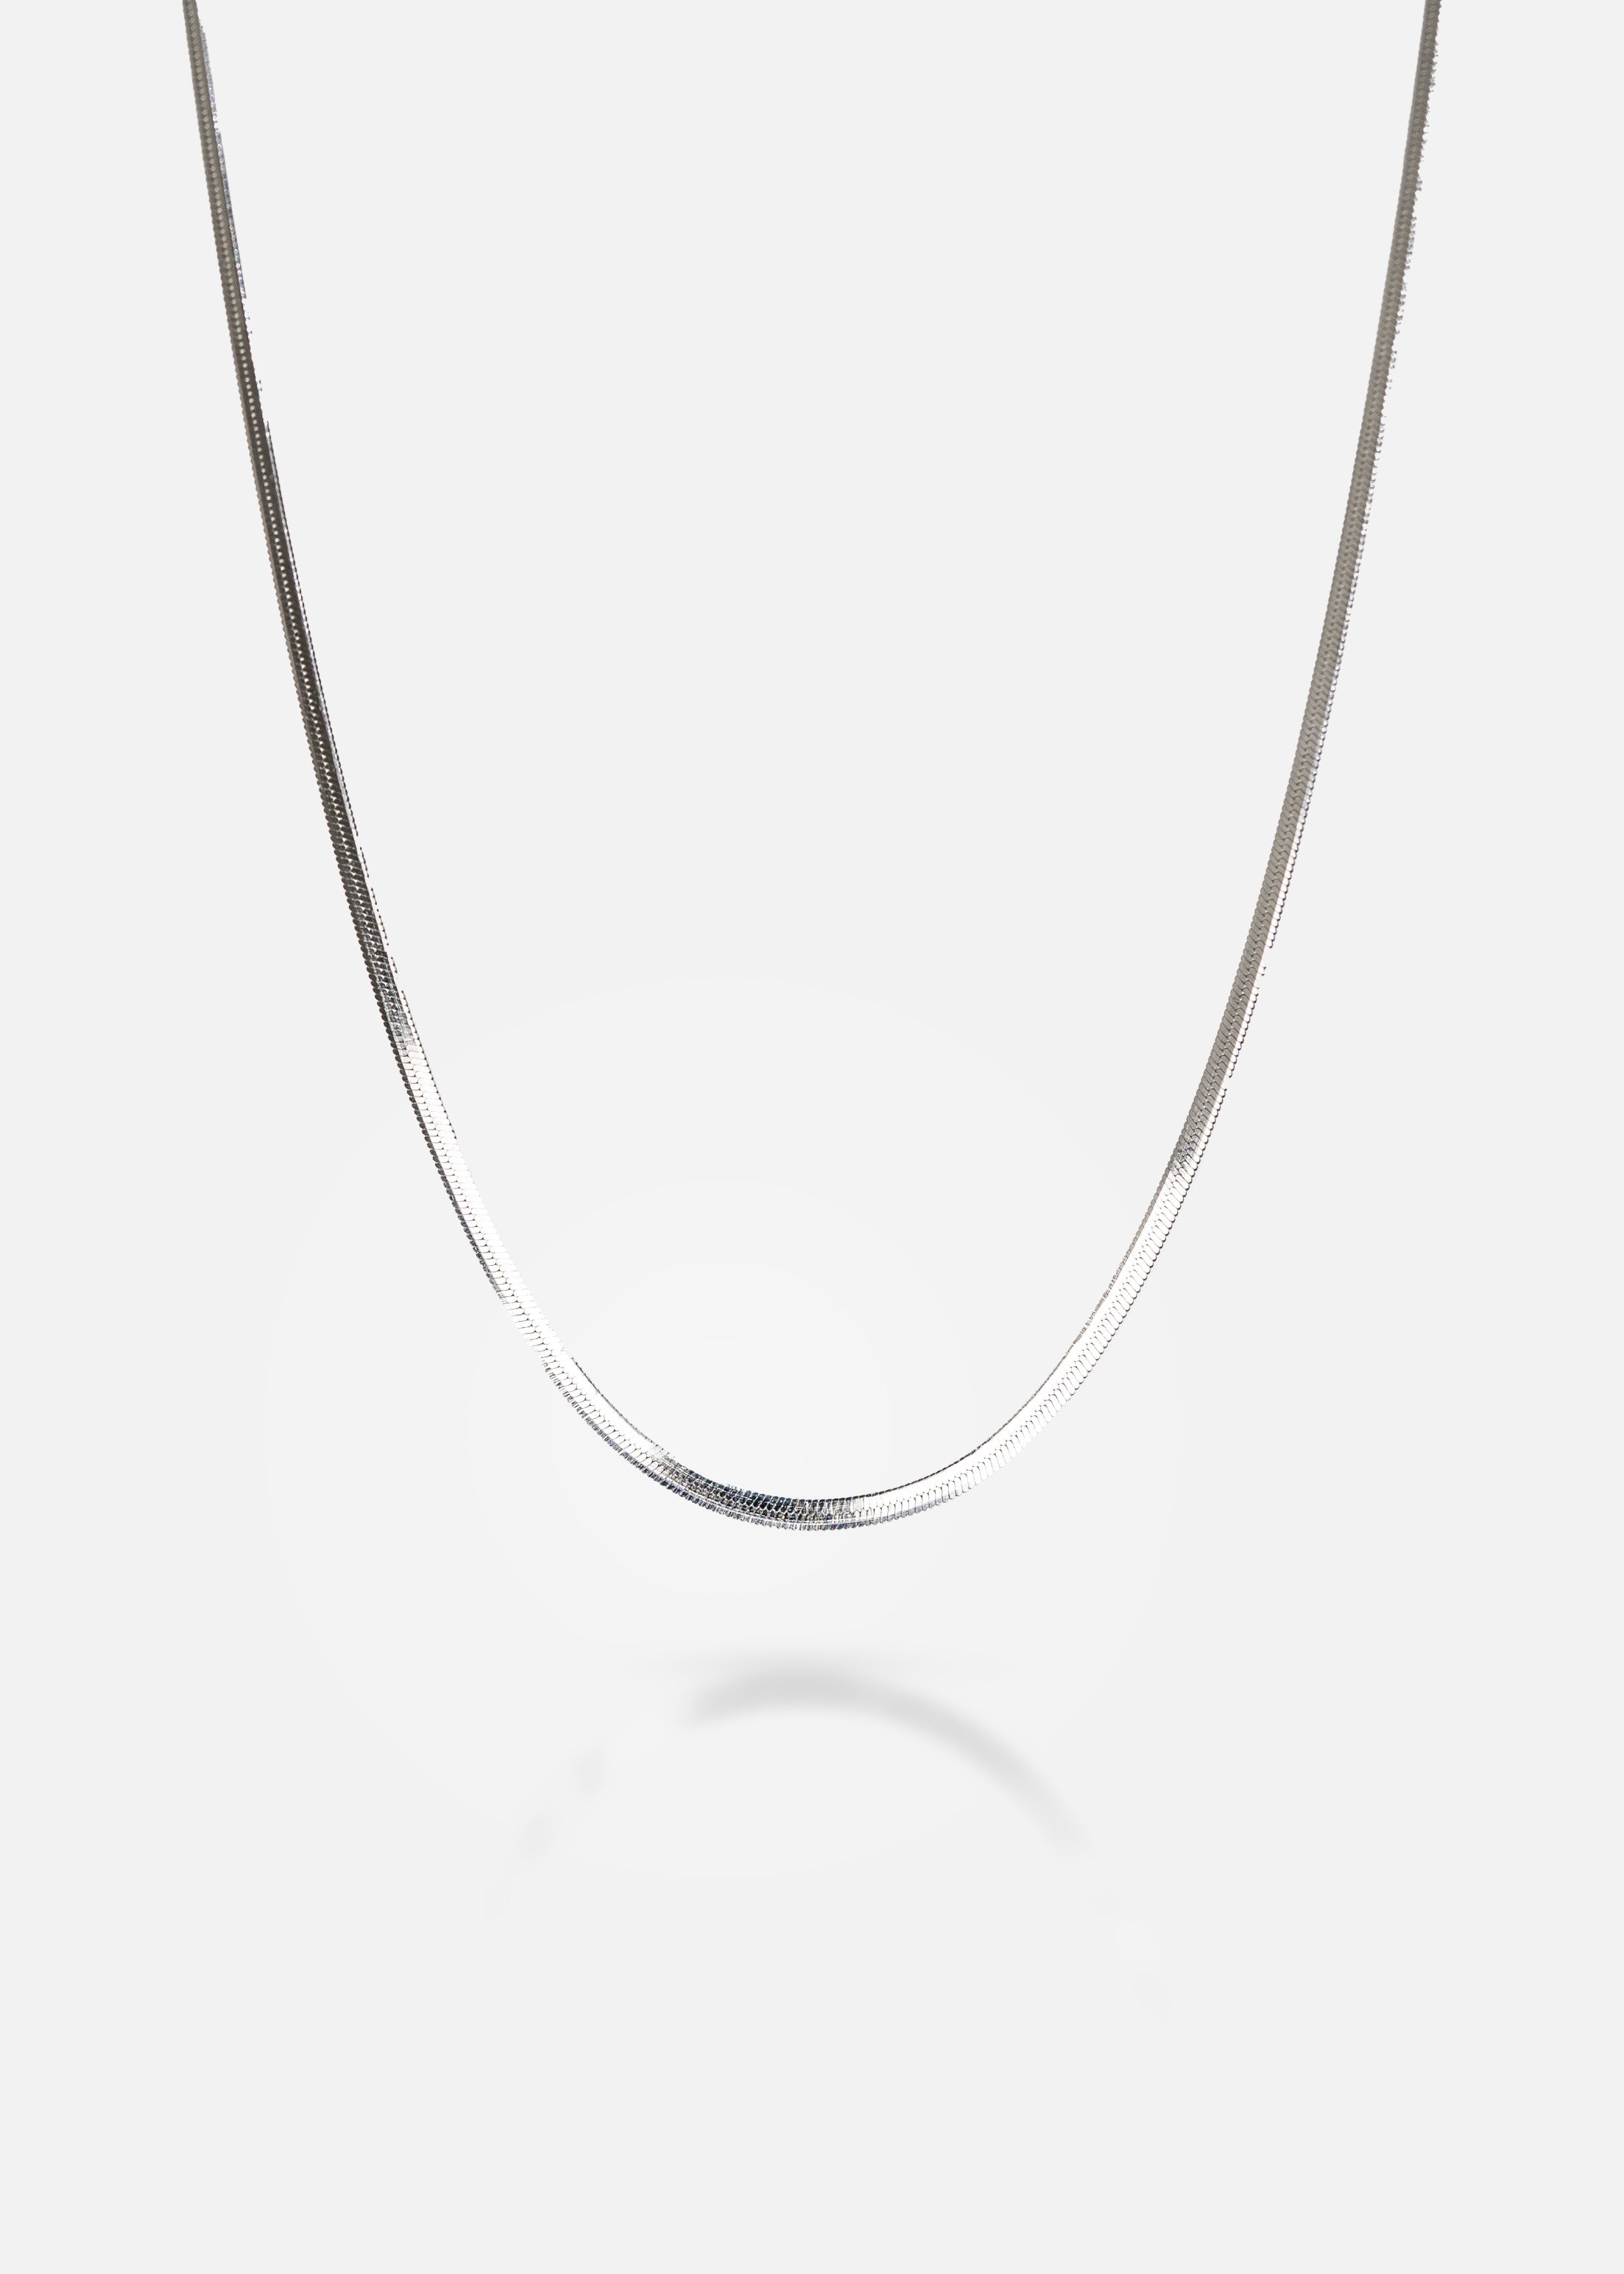 Snake Chain Silver 2 mm